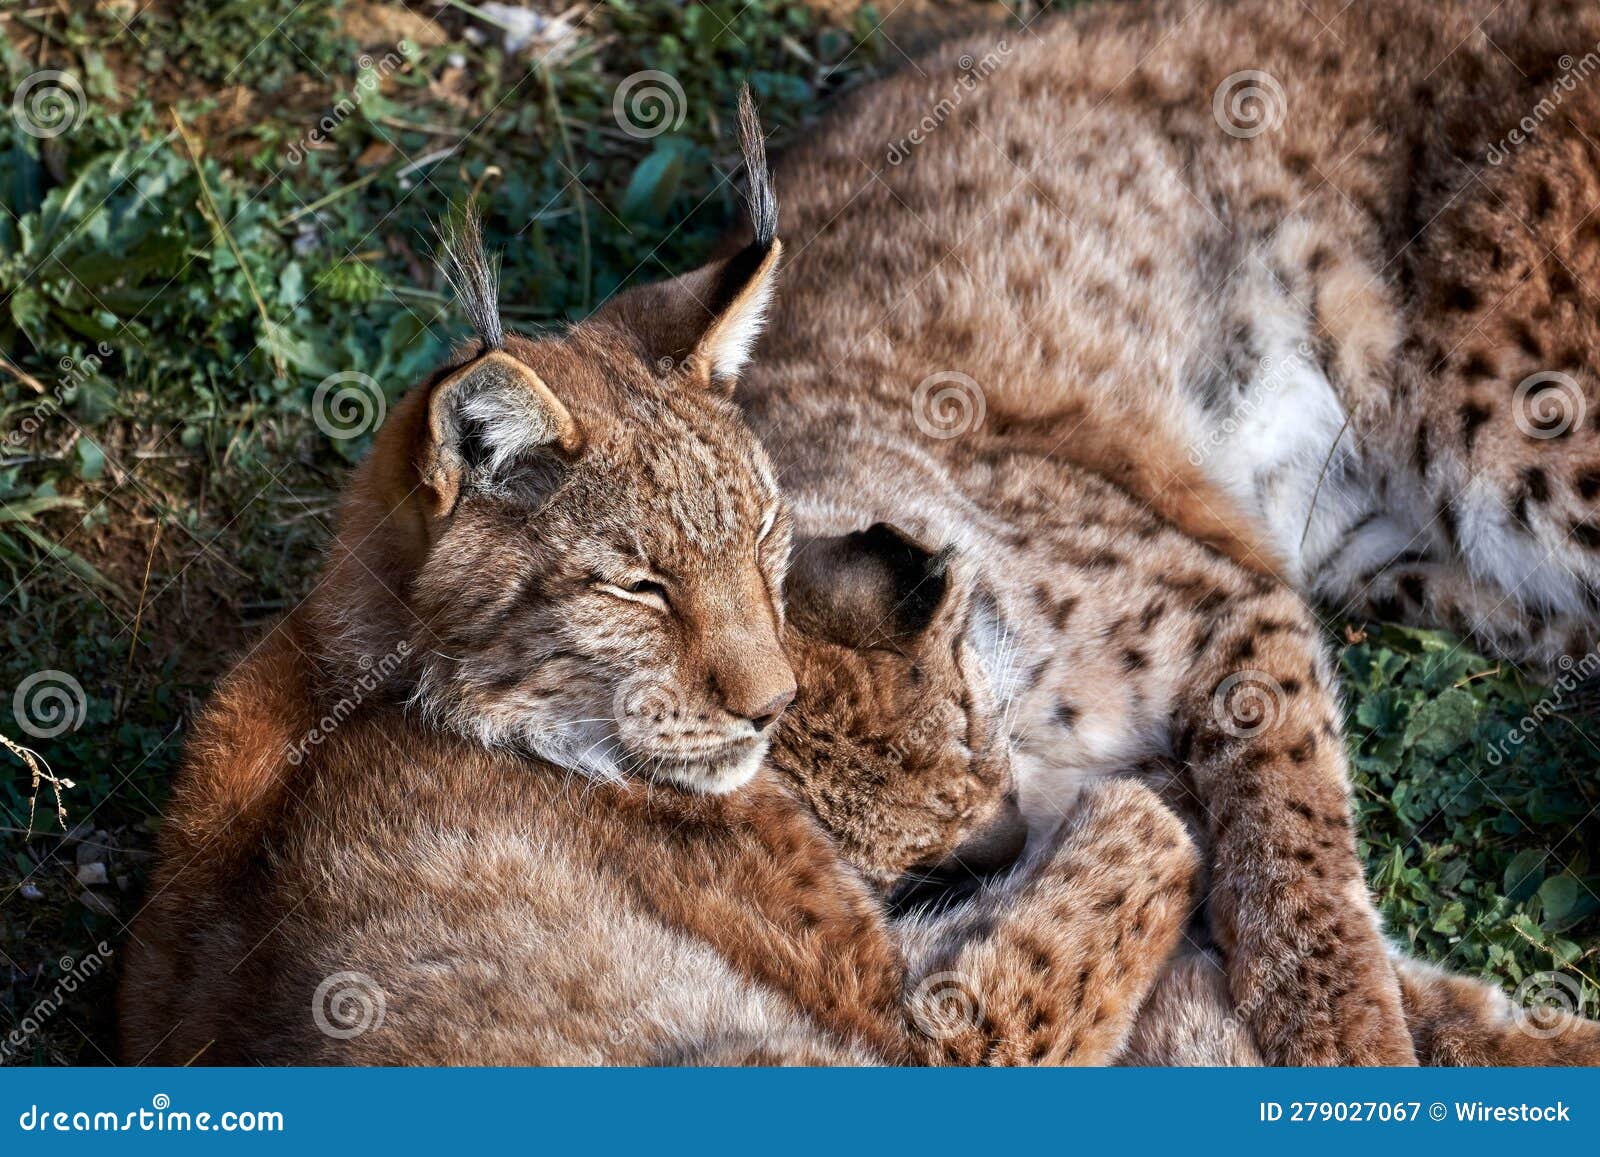 beautiful shot of majestic brown lynx animes huddled together in a sunny forest